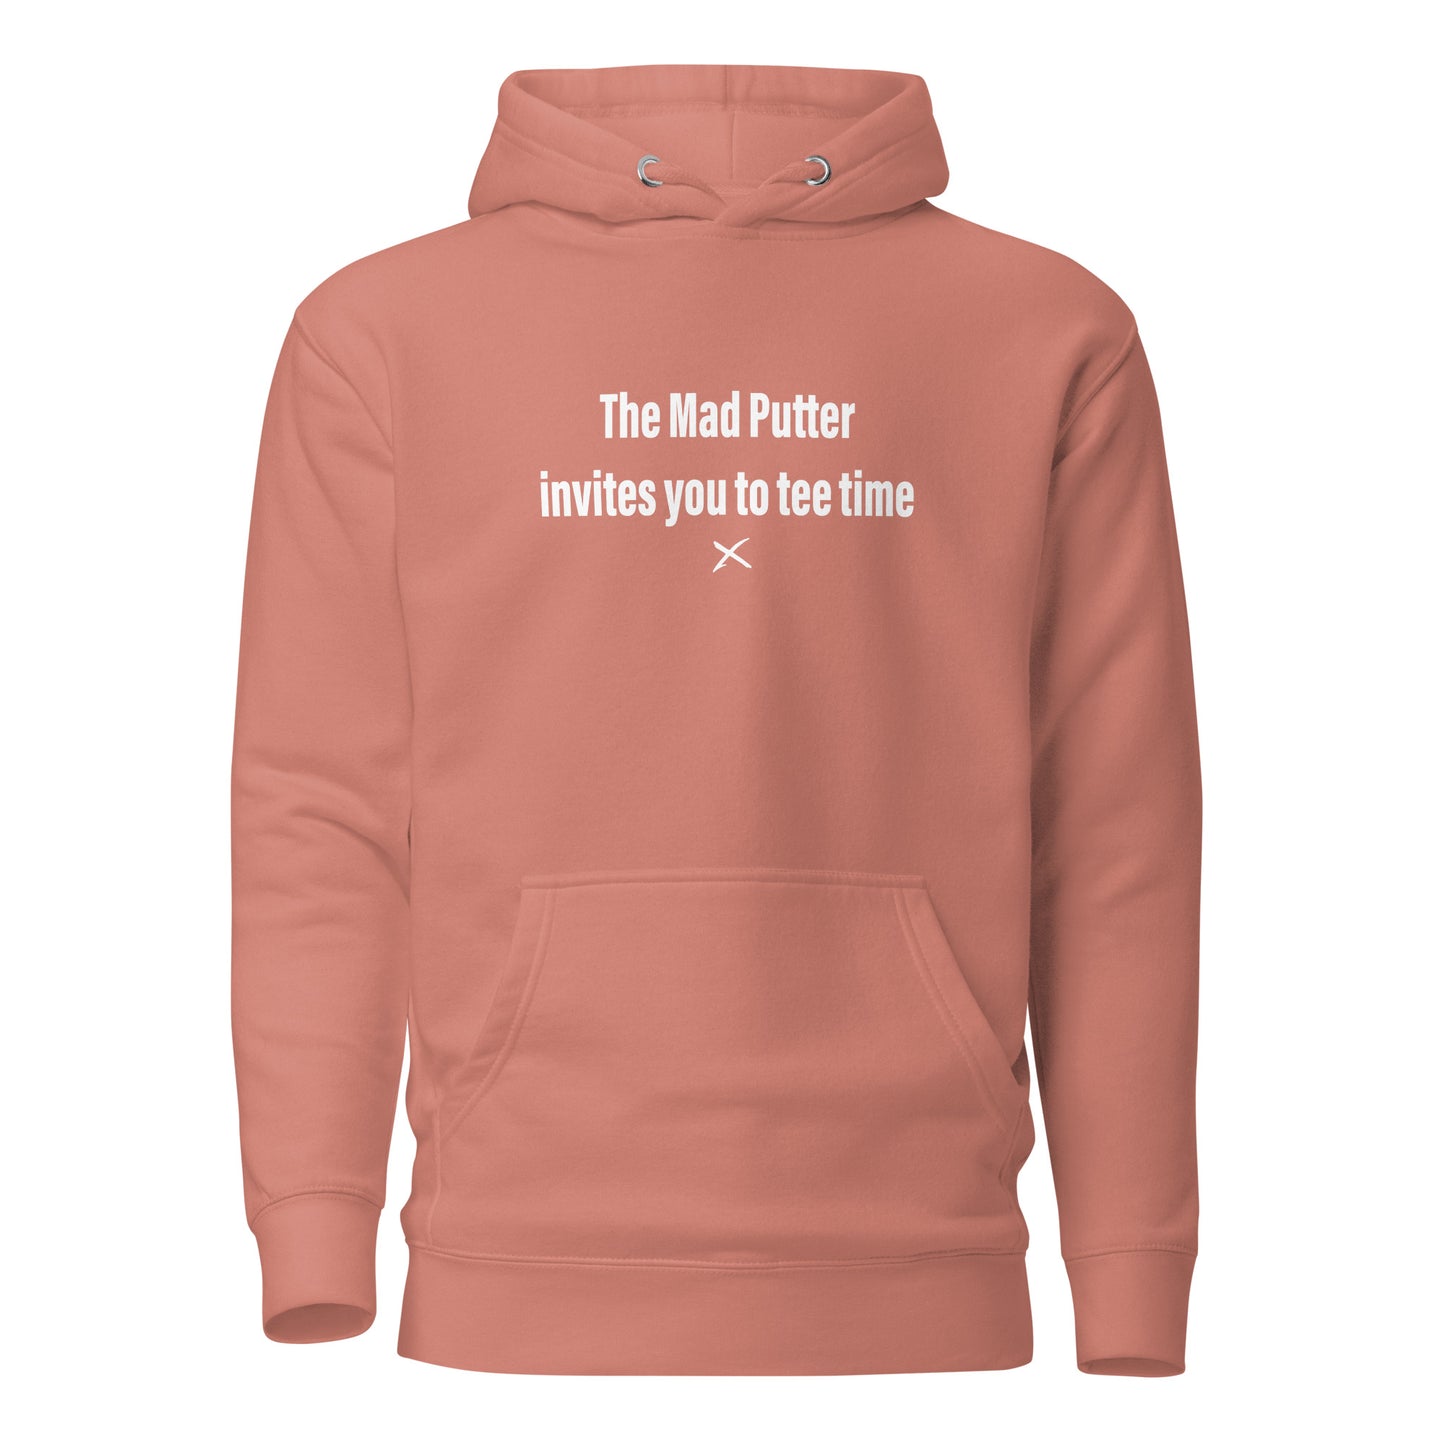 The Mad Putter invites you to tee time - Hoodie